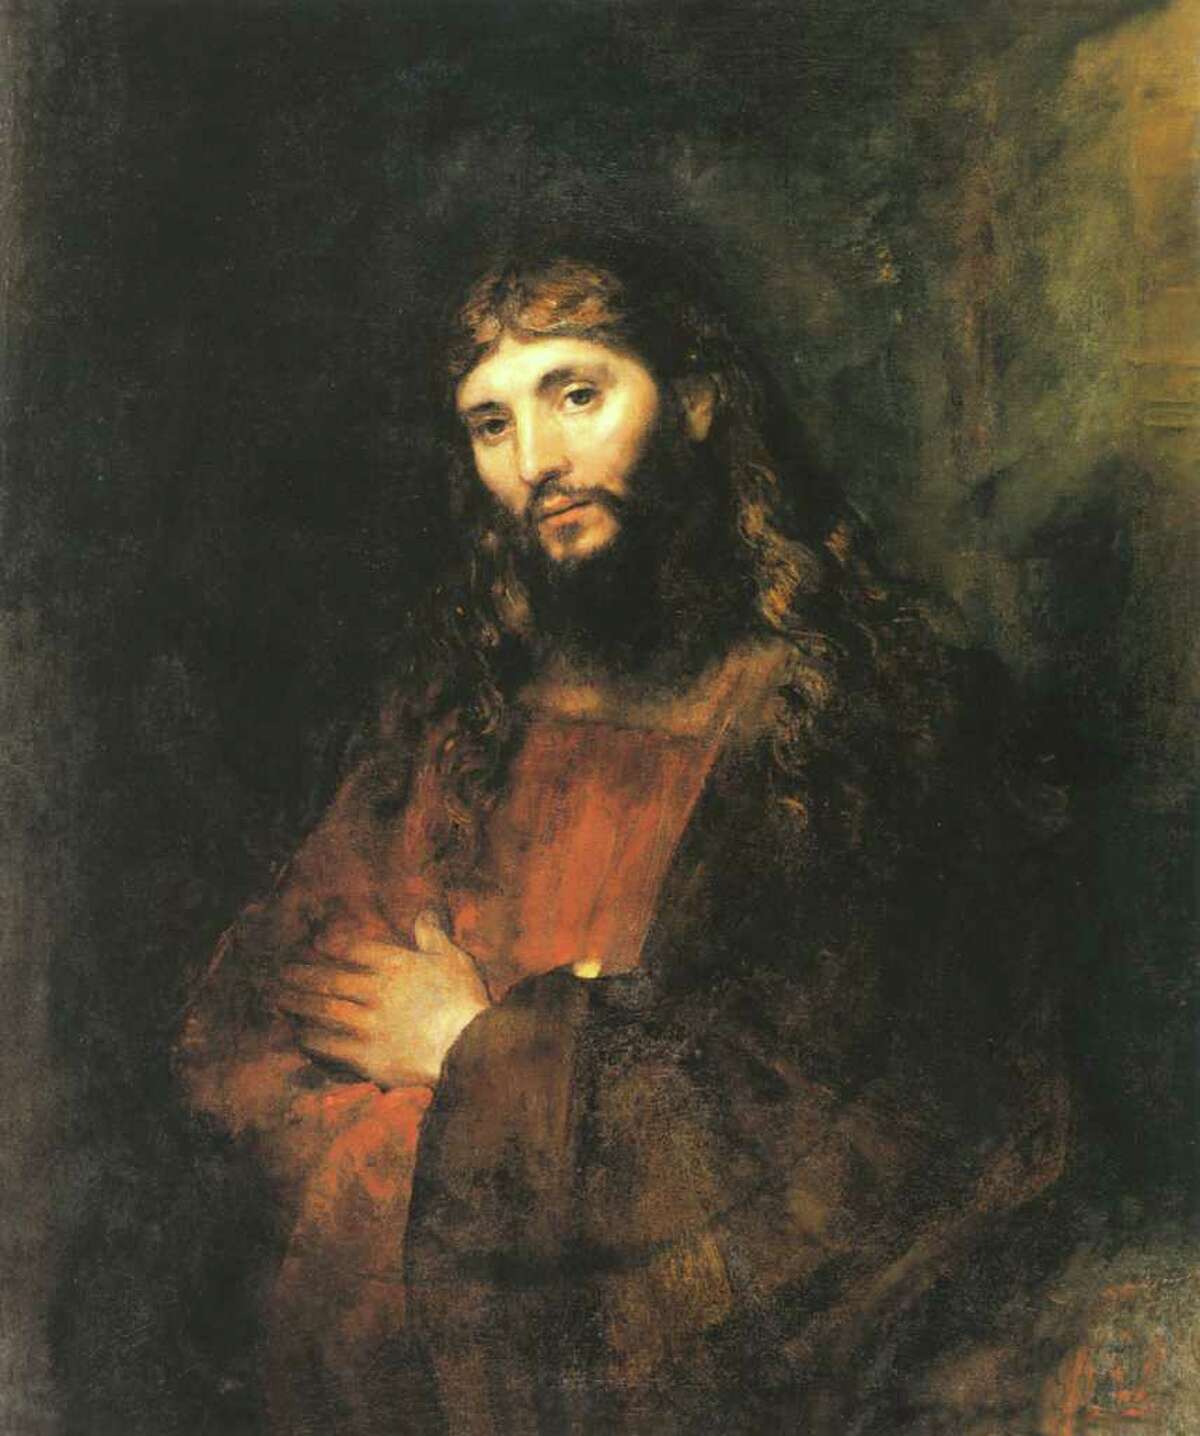 Christ with Folded Arms c. 1655-57, Rembrandt Harmenszoon van Rijn, Dutch, 1606-1669; oil on canvas, 43 in x 35-1/2?, 1971.37 (The Hyde Collection)